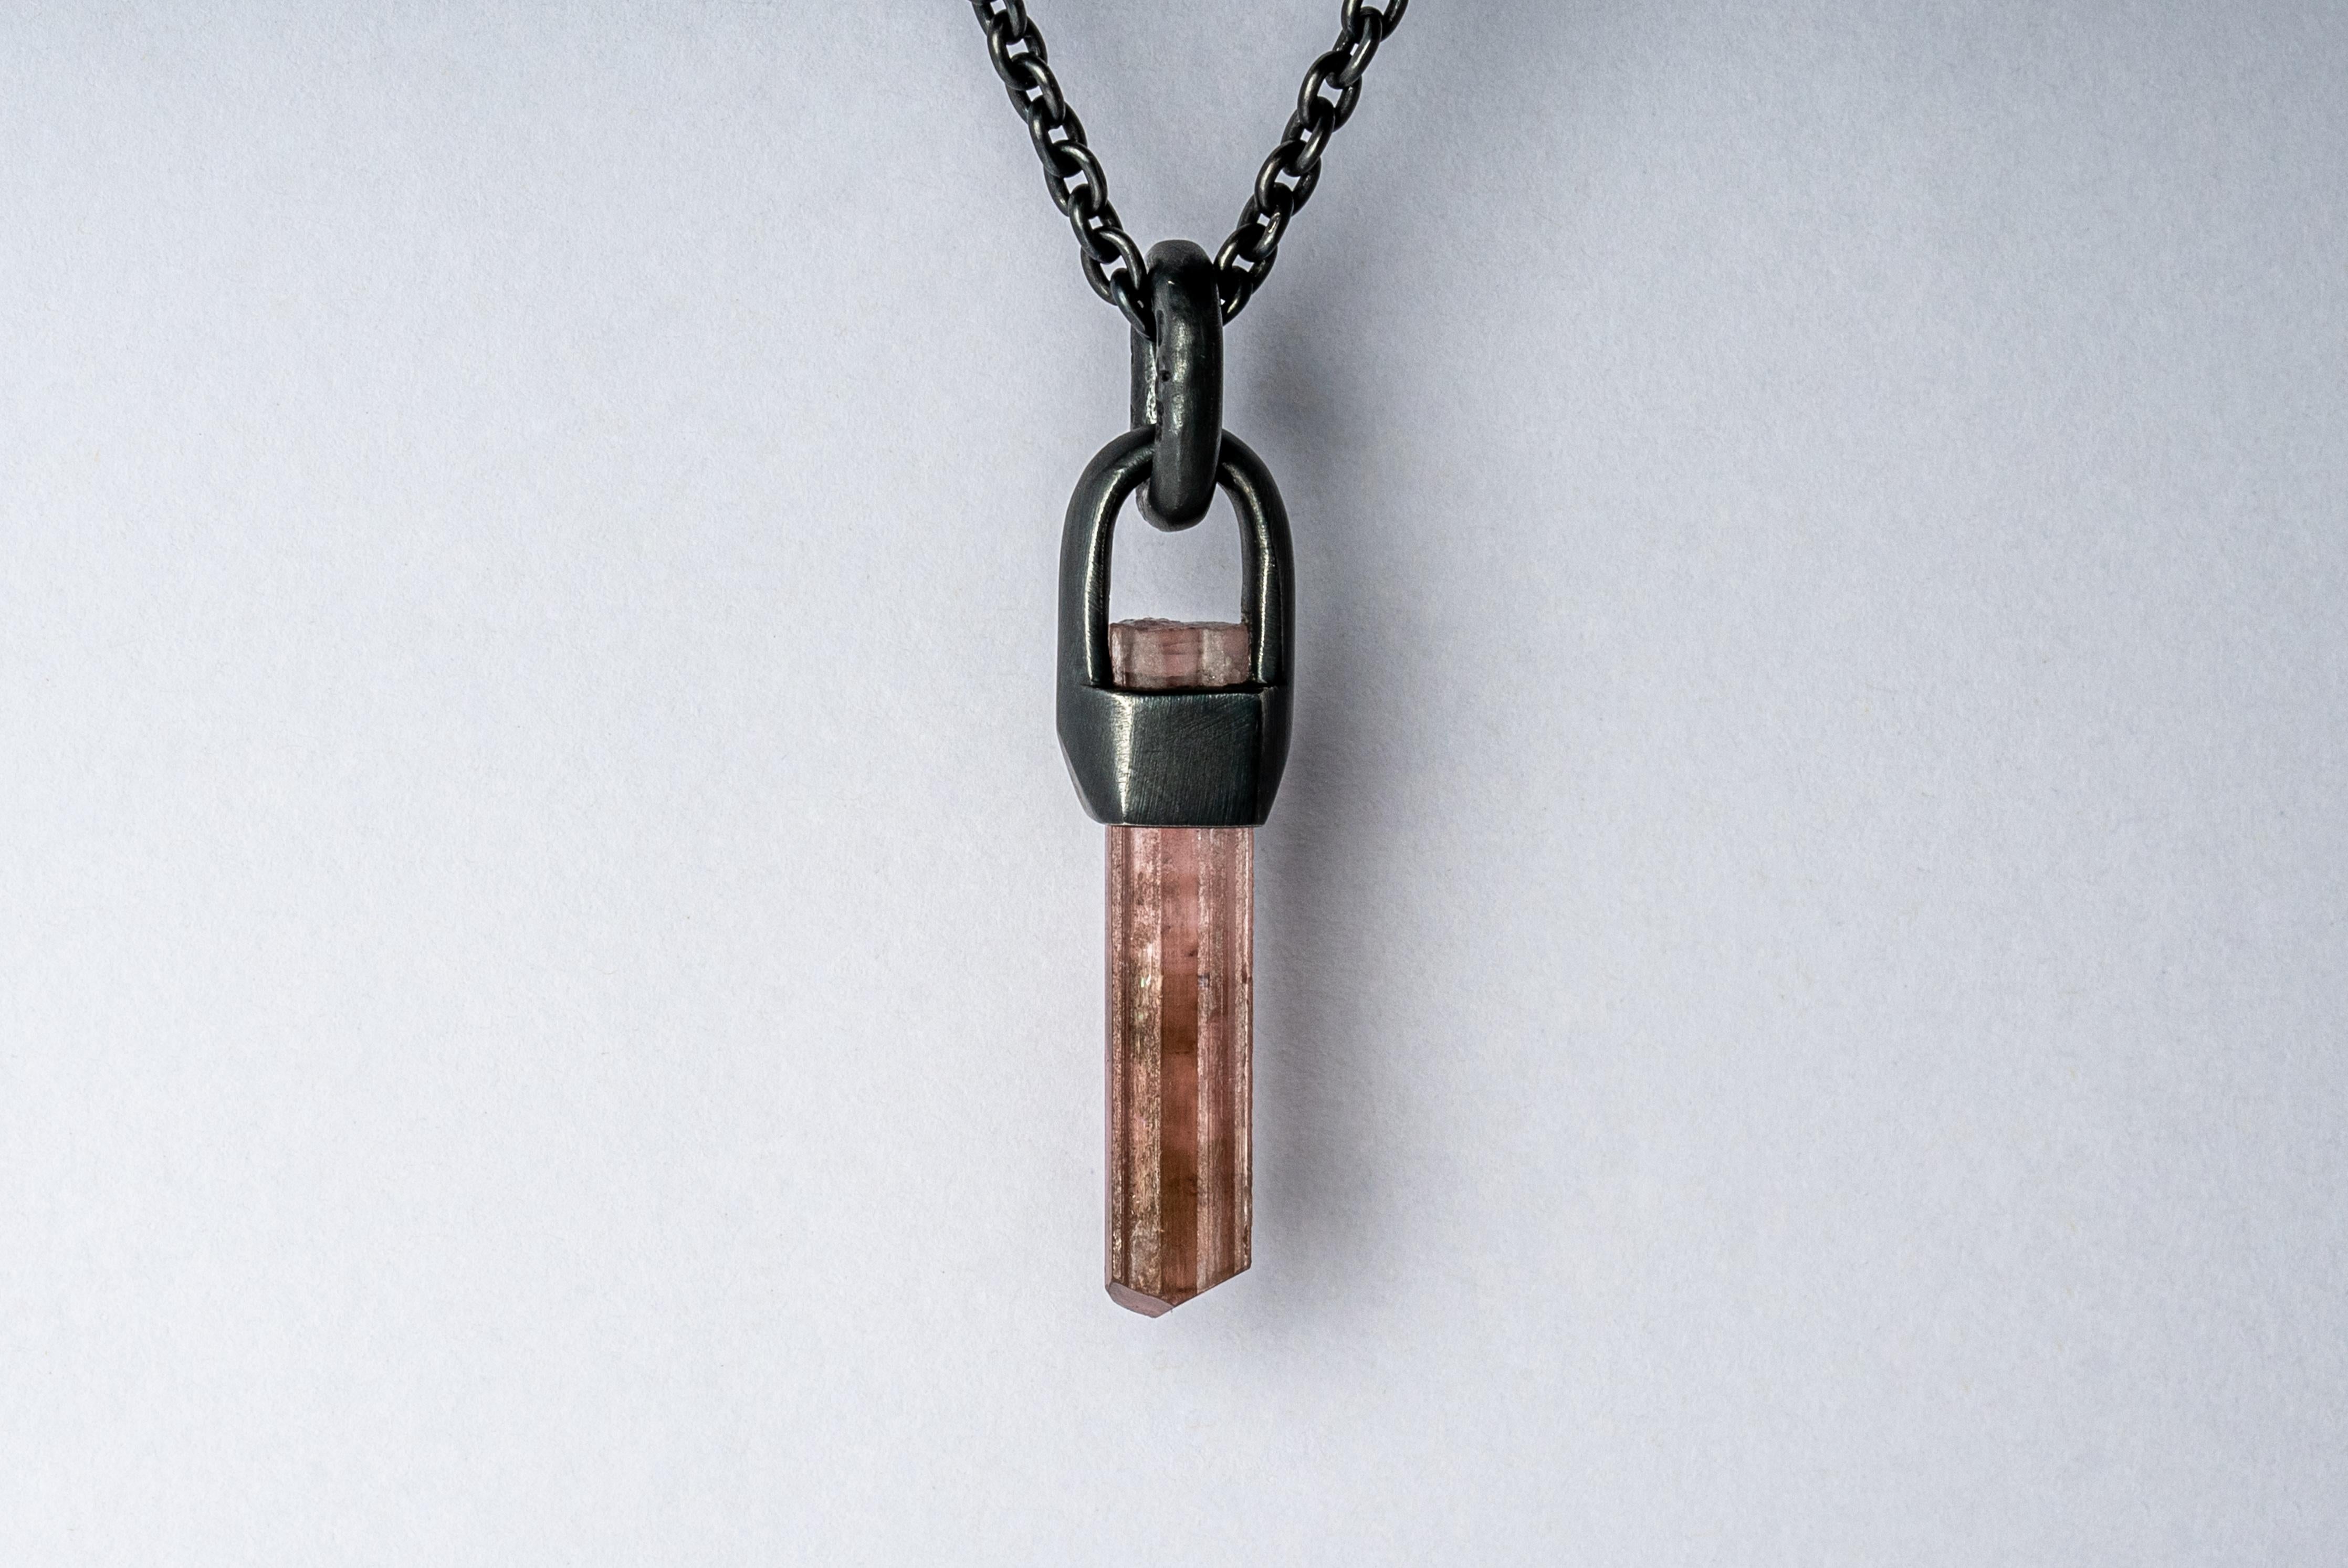 Necklace in oxidized sterling silver and a rough of rubellite, a pink-read tourmaline color. The Talisman series is an exploration into the power of natural crystals. Tools for Magic. The crystals used in these pieces are discovered through